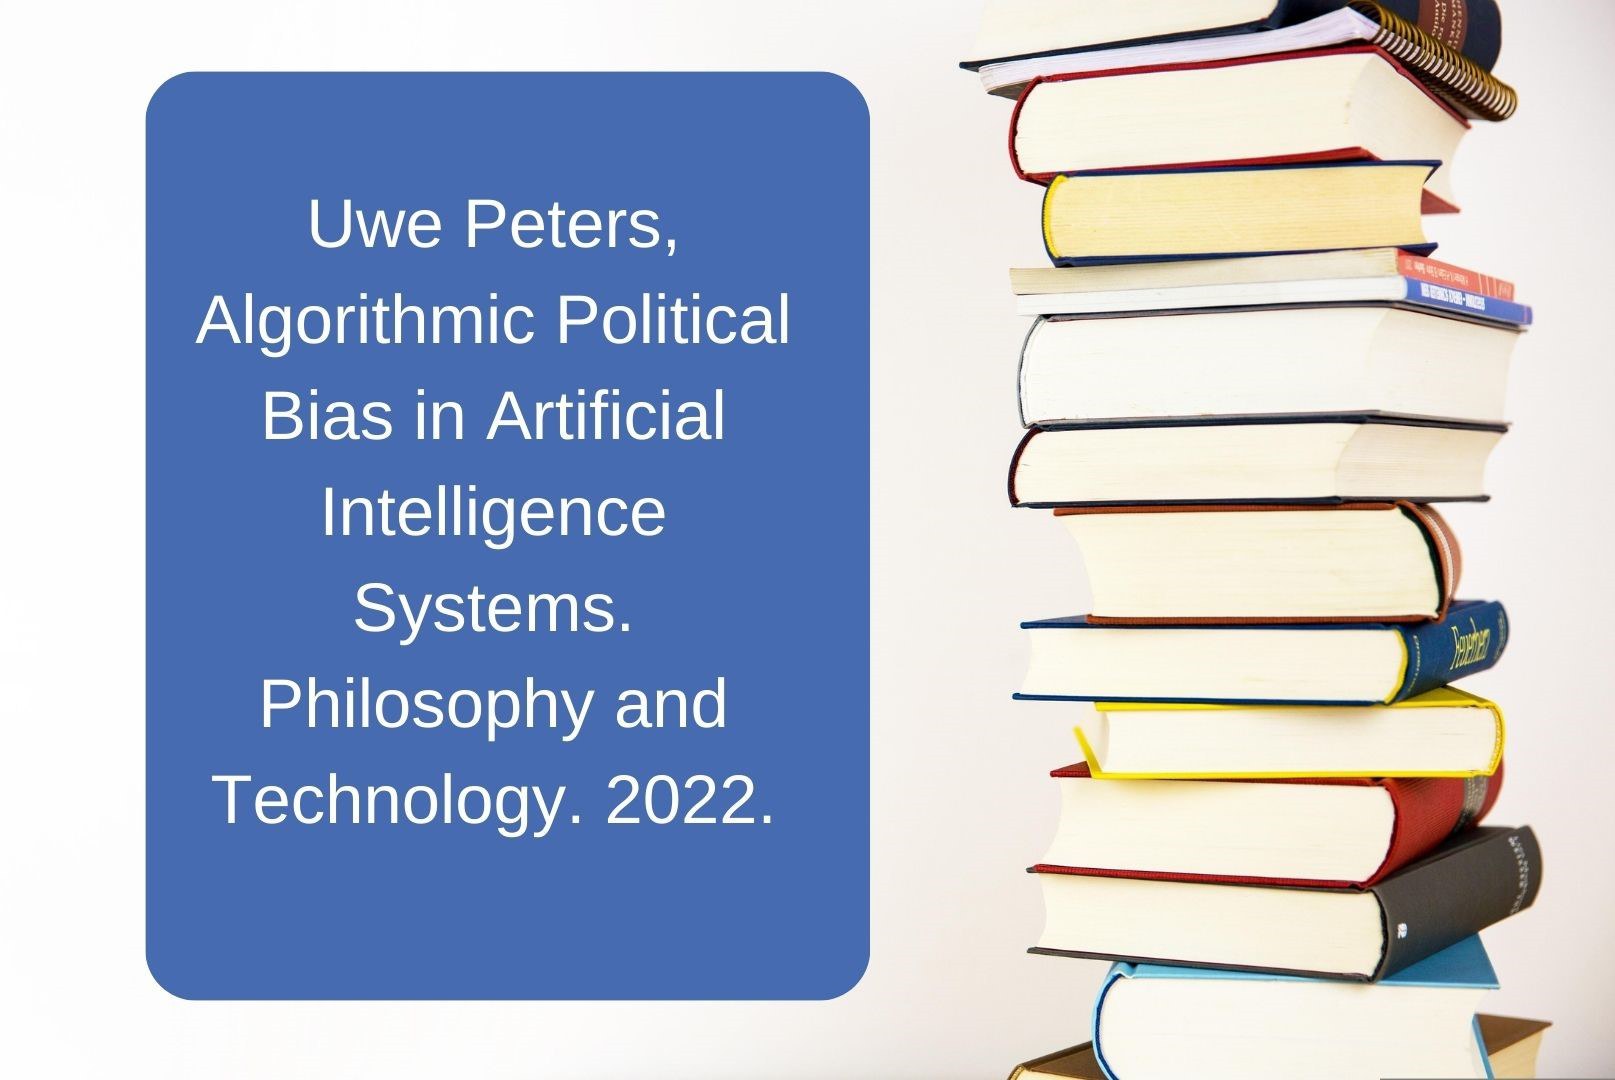 Uwe Peters, Algorithmic Political Bias in Artificial Intelligence Systems. Philosophy and Technology. 2022..jpg